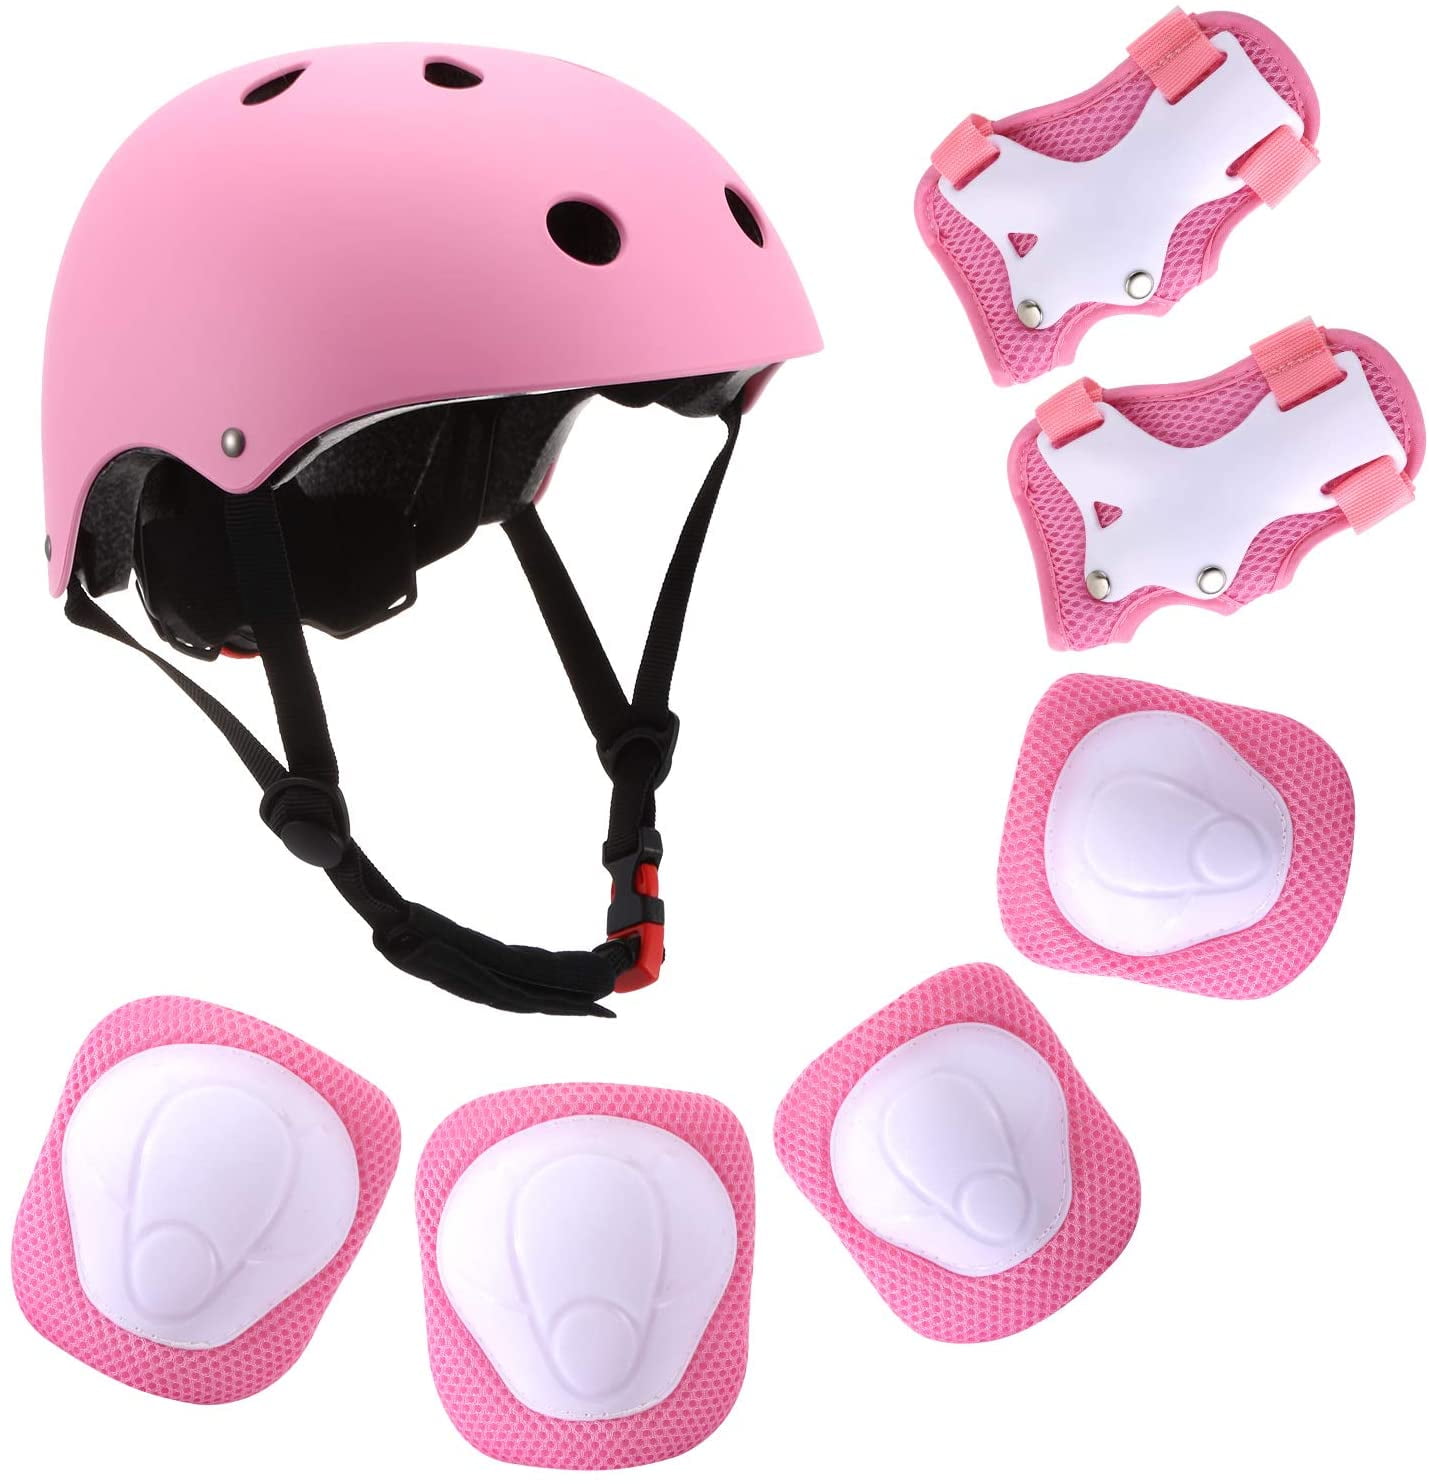 XJD Kids Bike Helmet Protective Gear Set Age 3-13 years Knee Pads Elbow Pads Wrist Guards and Adjustable Skateboard Helmets for Scooter Cycling Roller Skating Boys Girls 